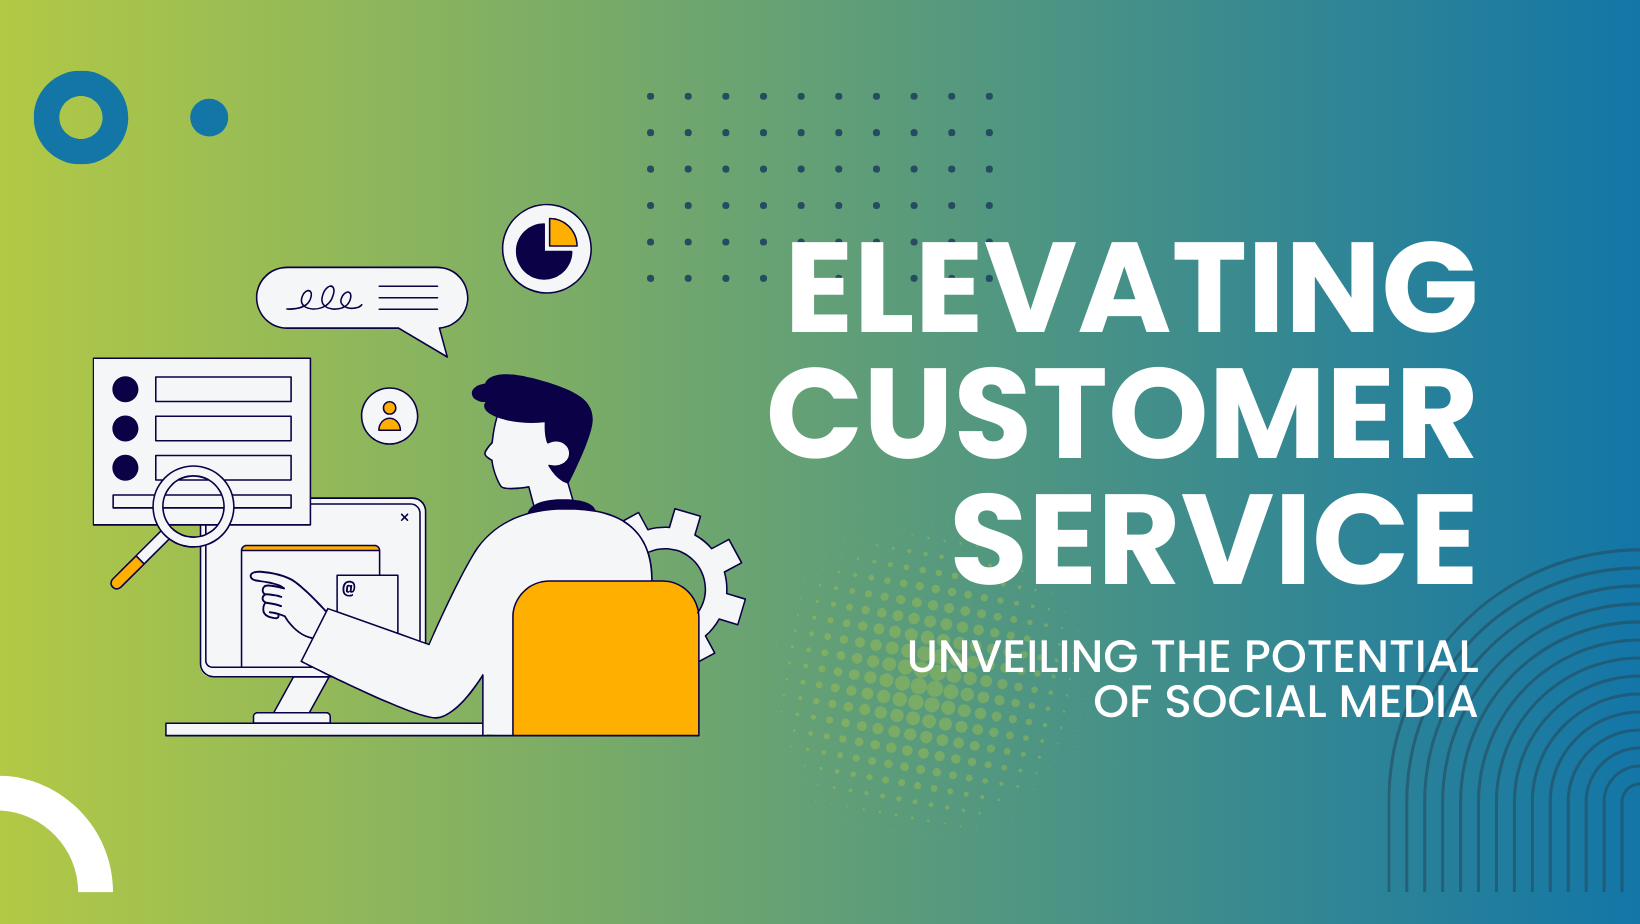 Elevating Customer Service: Unveiling the Potential of Social Media graphic